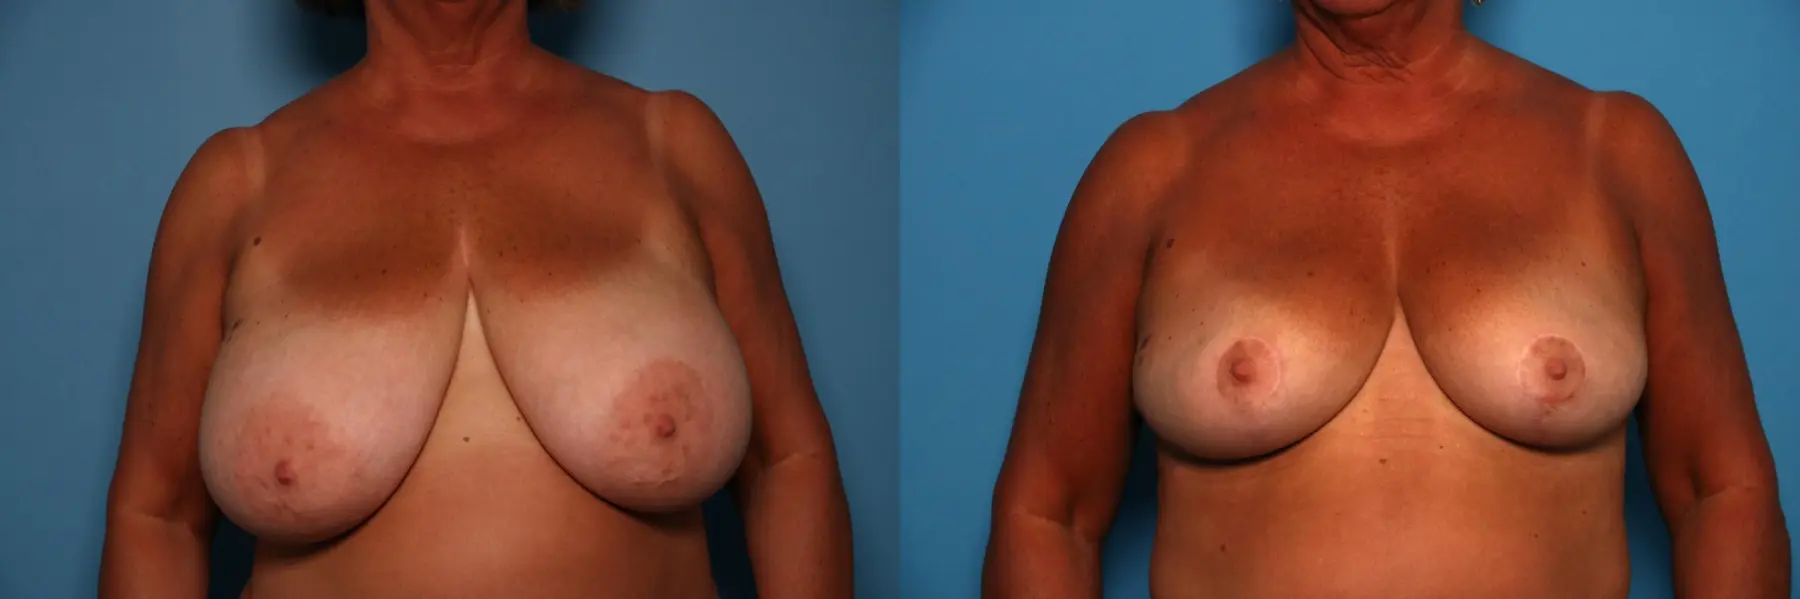 Breast Lift-Reduction: Patient 11 - Before and After  